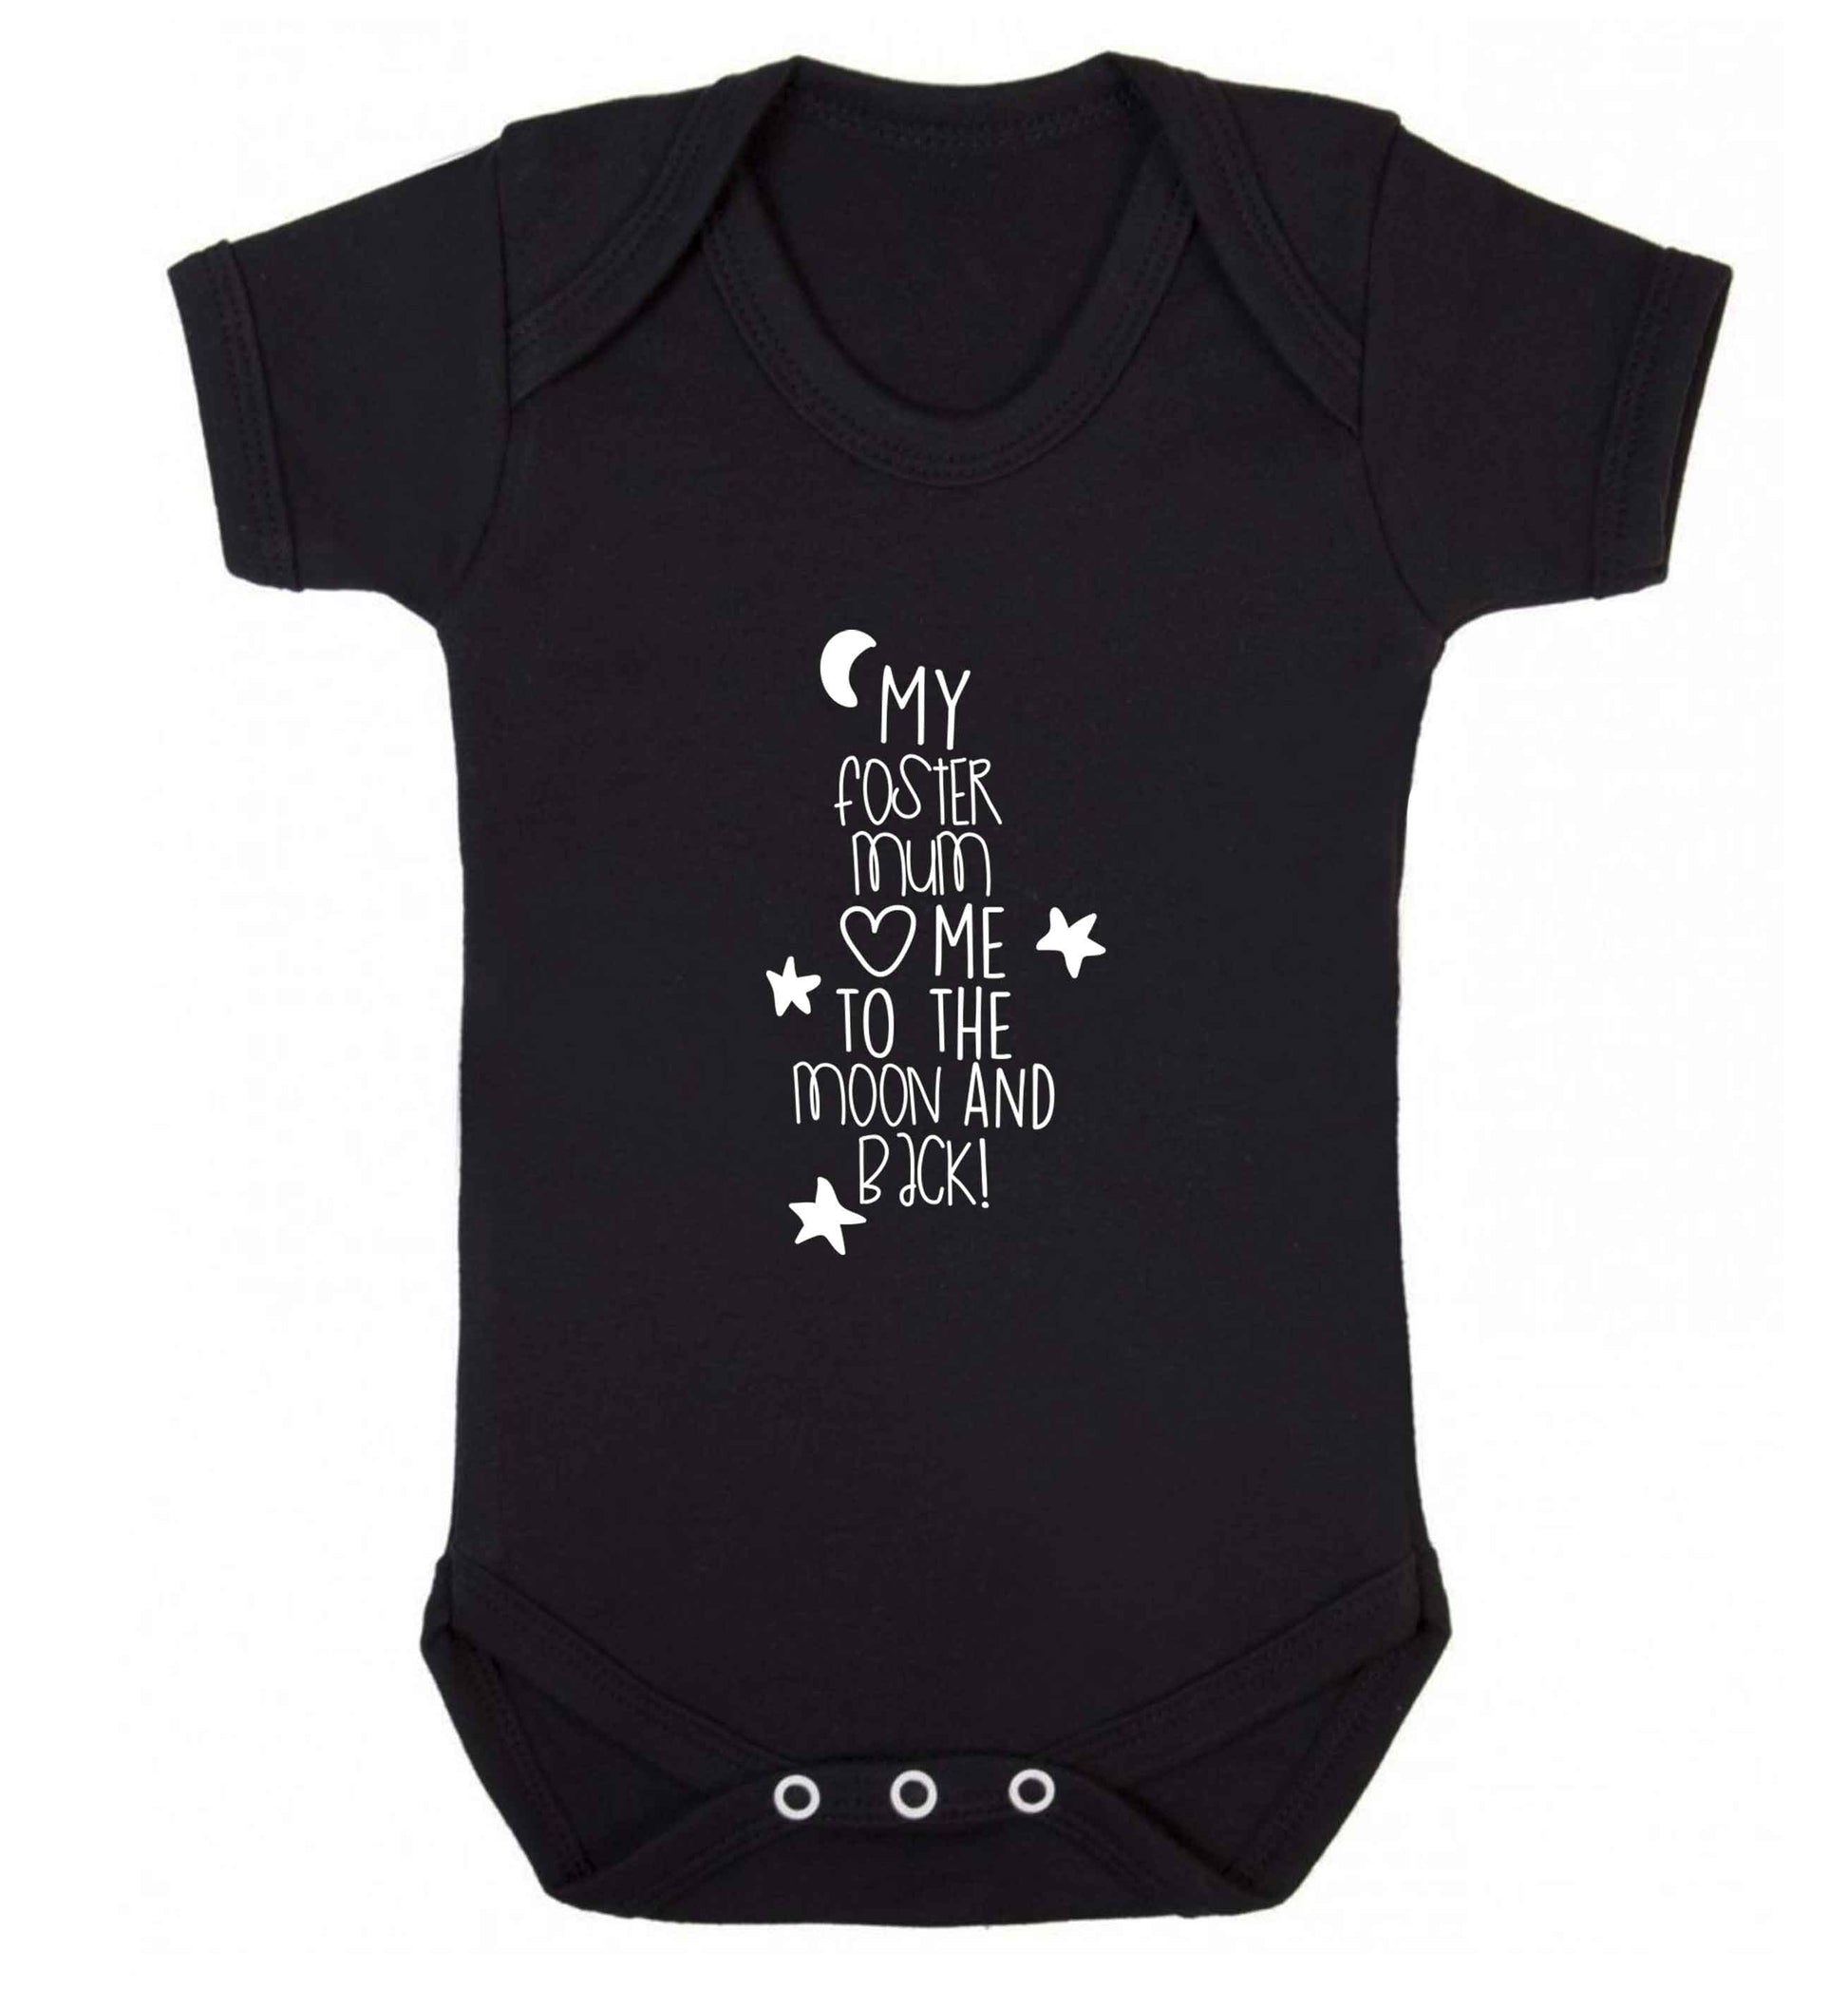 My foster mum loves me to the moon and back baby vest black 18-24 months